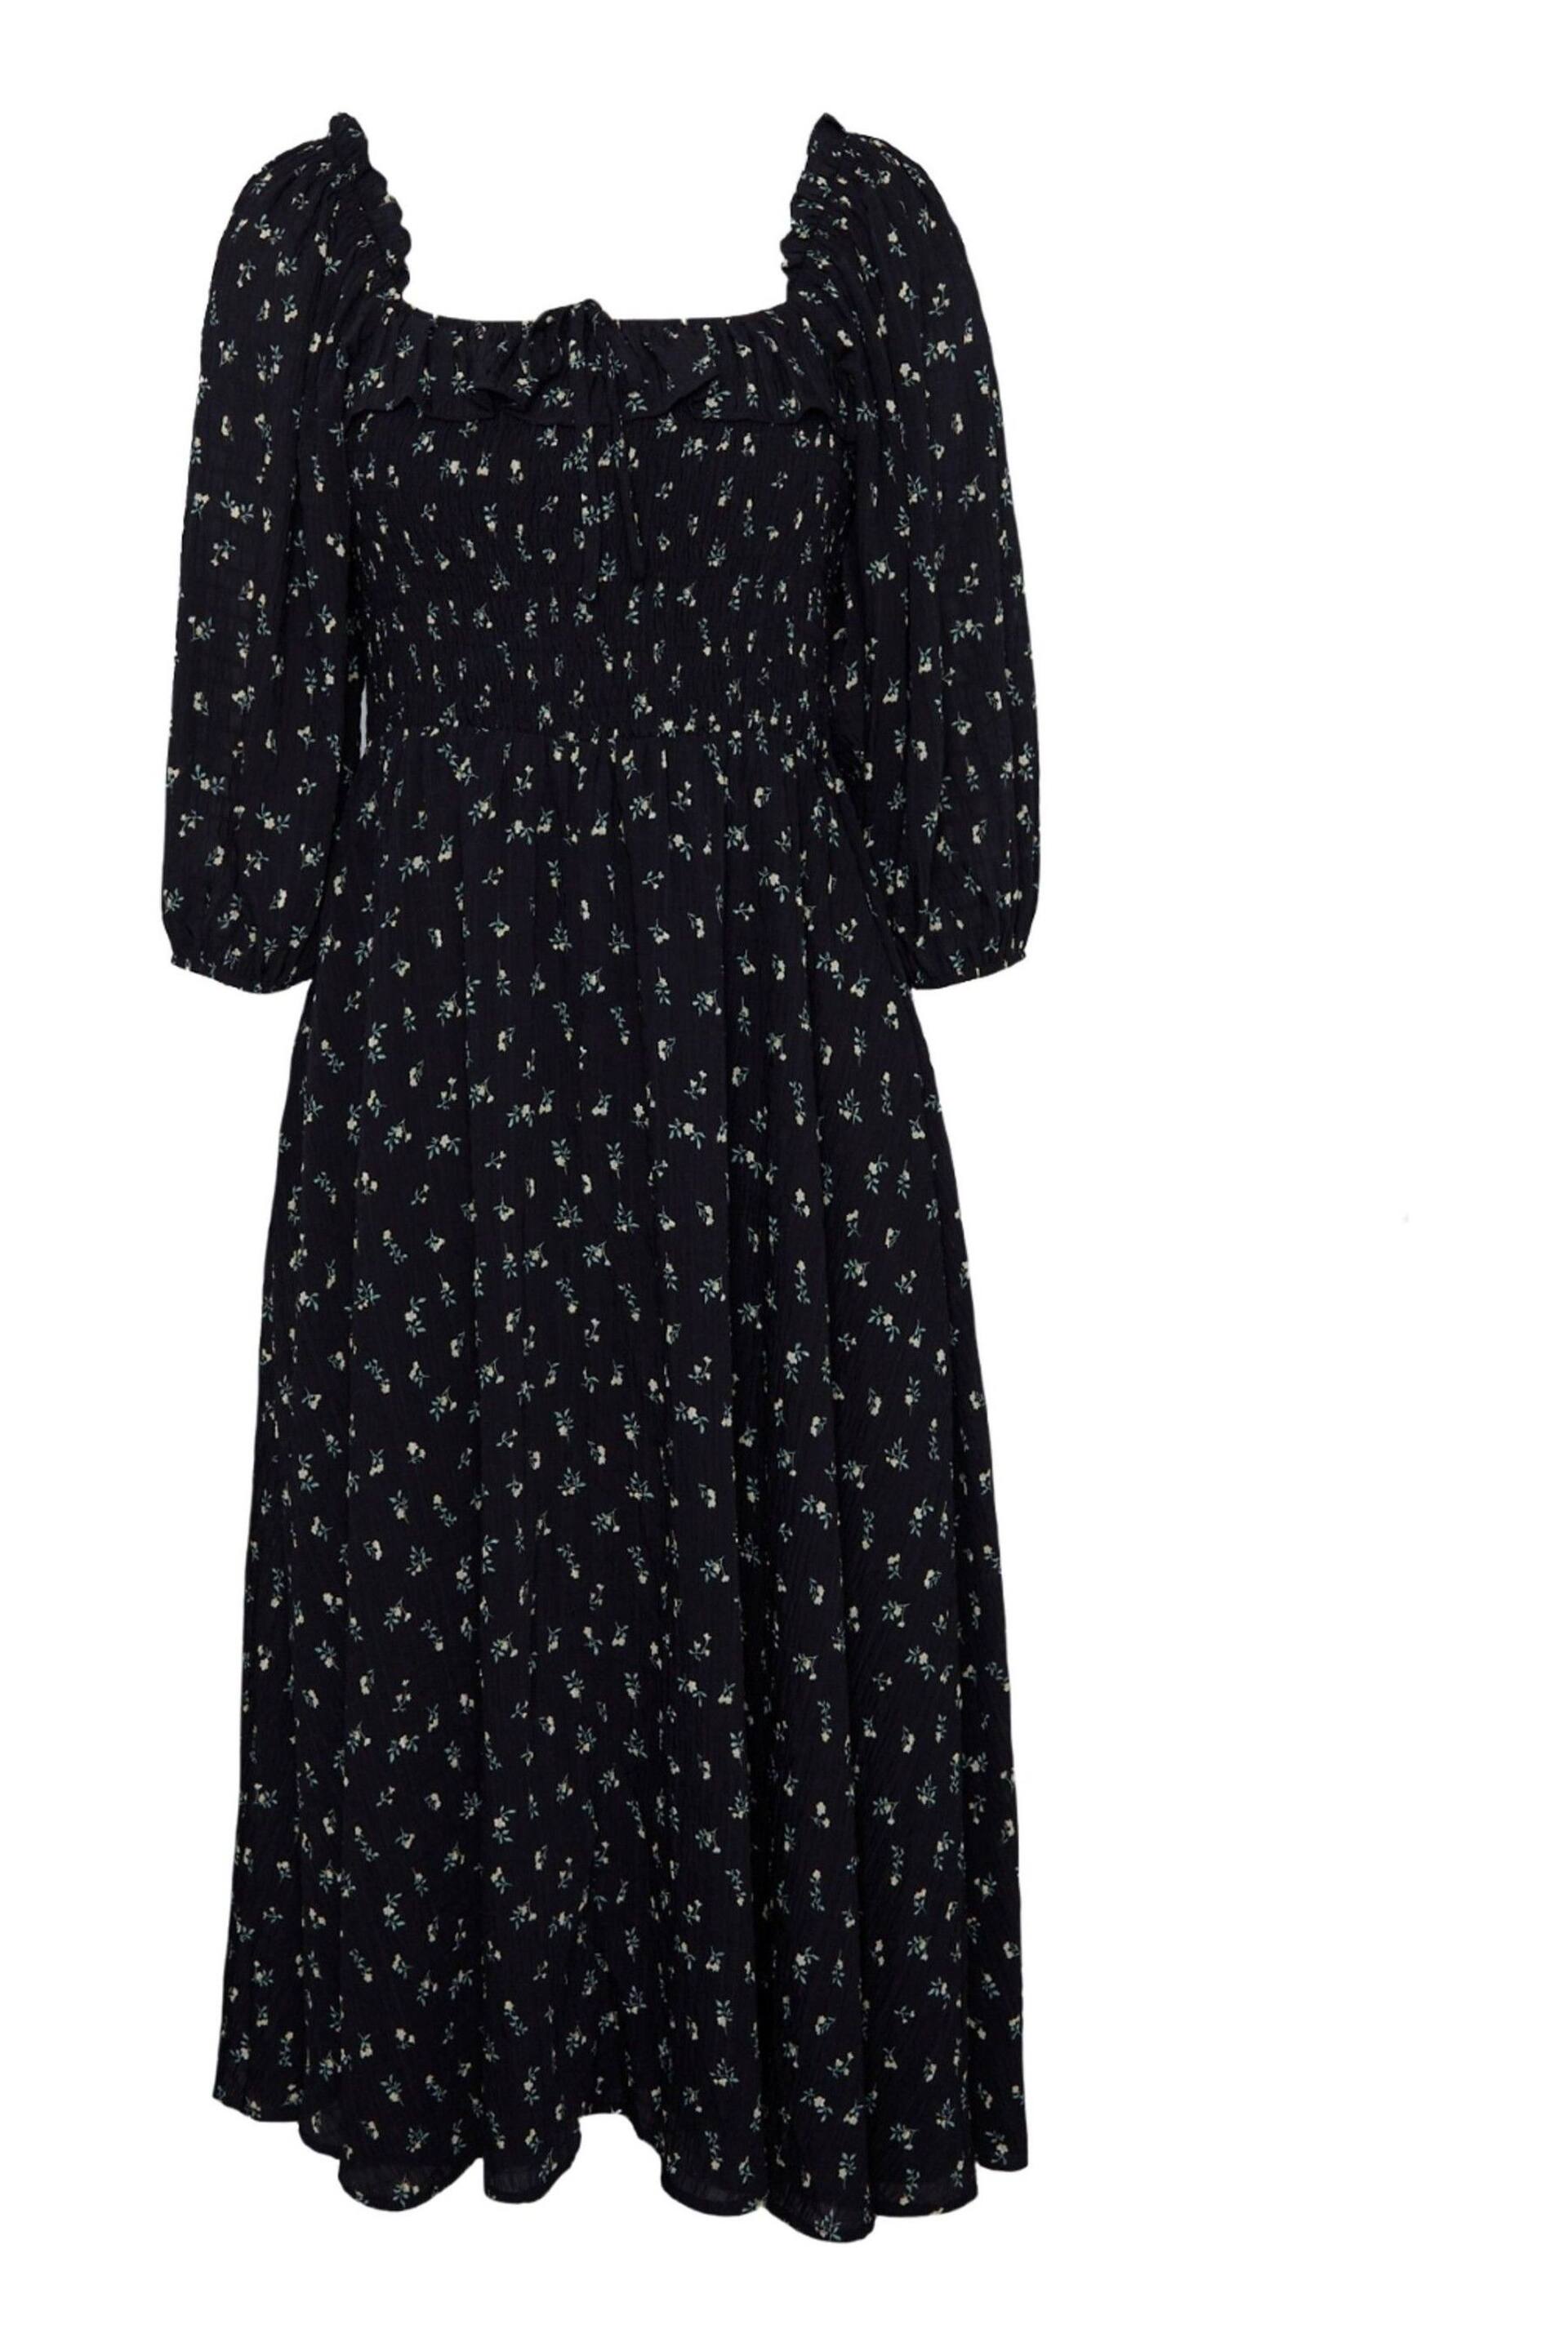 Another Sunday Shirred Bust 3/4 Sleeve Milkmaid Ditsy Print Black Dress - Image 4 of 6